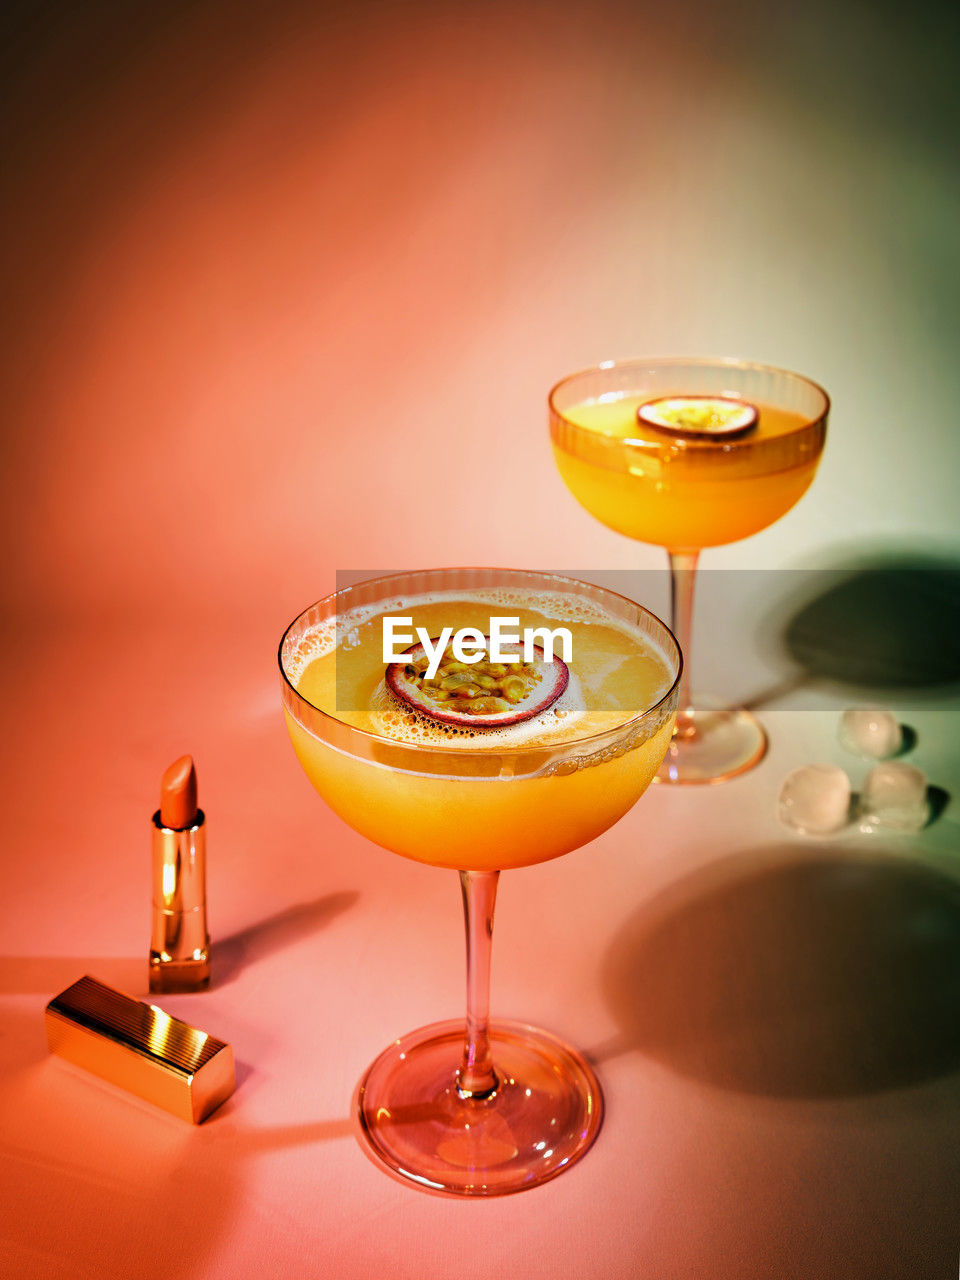 Close up of pornstar martini - a cocktail with vodka, vanilla and passion fruit